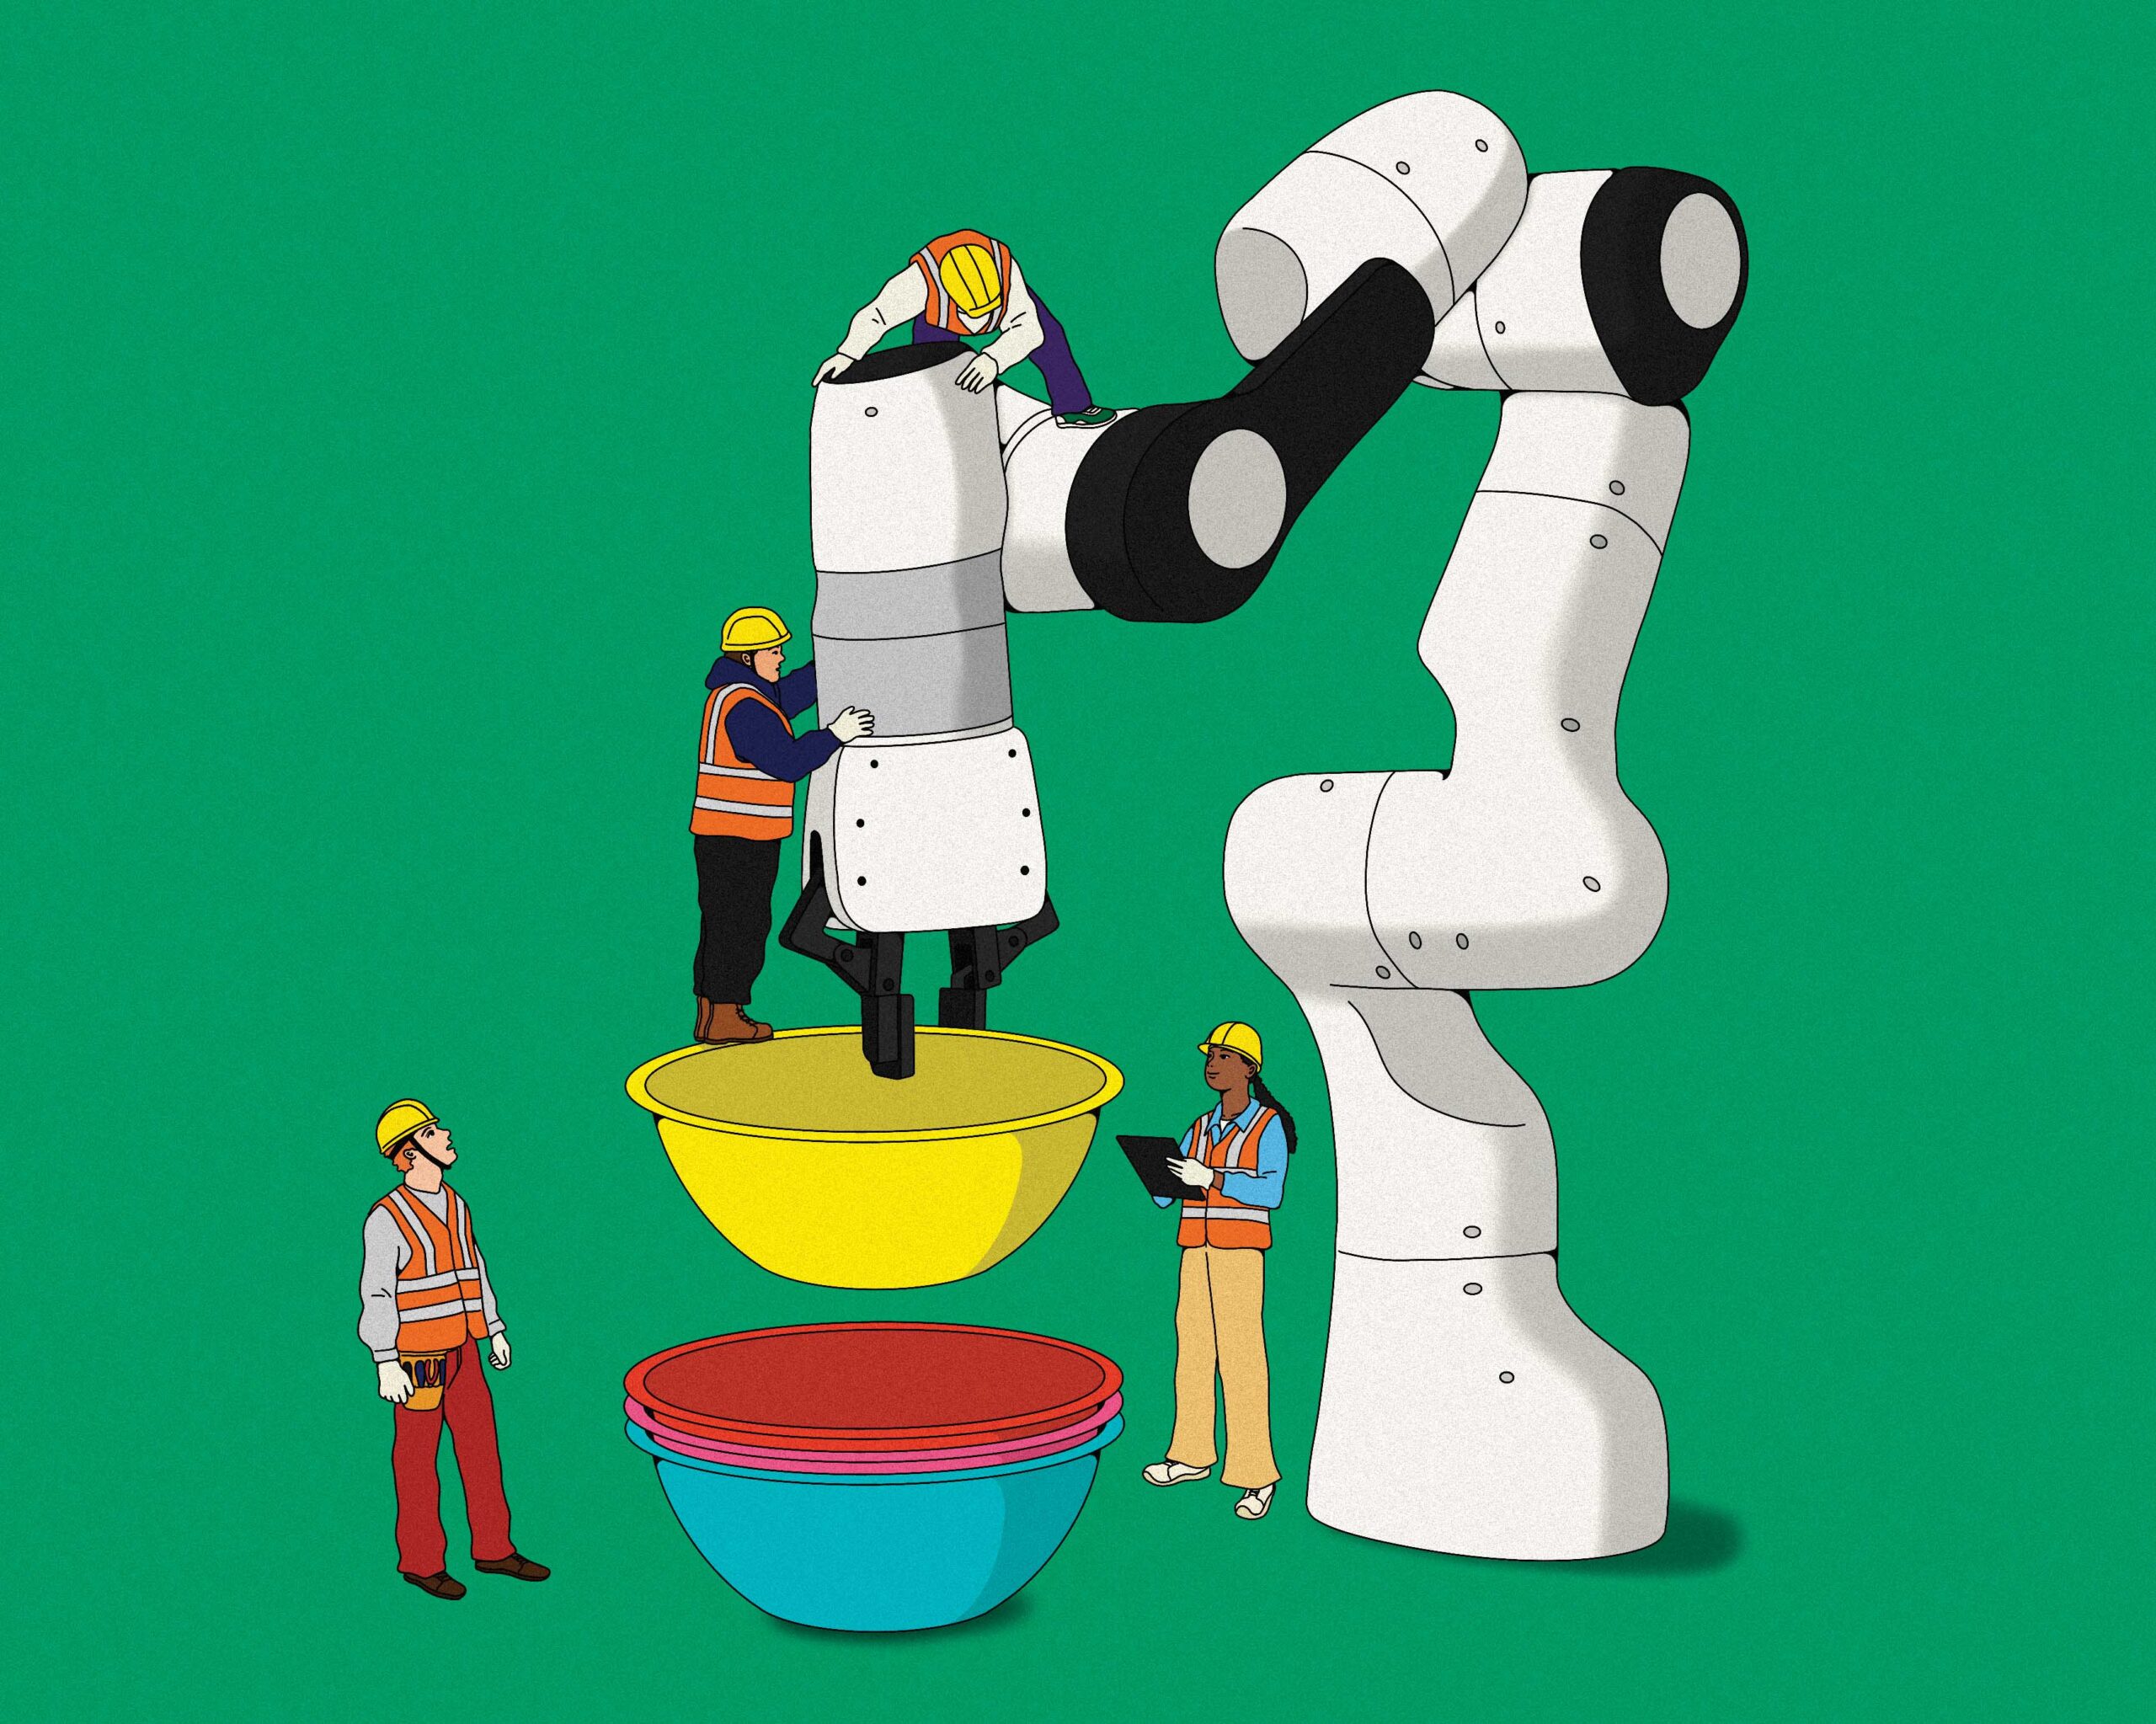 A robot tool placing a bowl onto a stack of bowls, with tiny human construction workers directing its actions